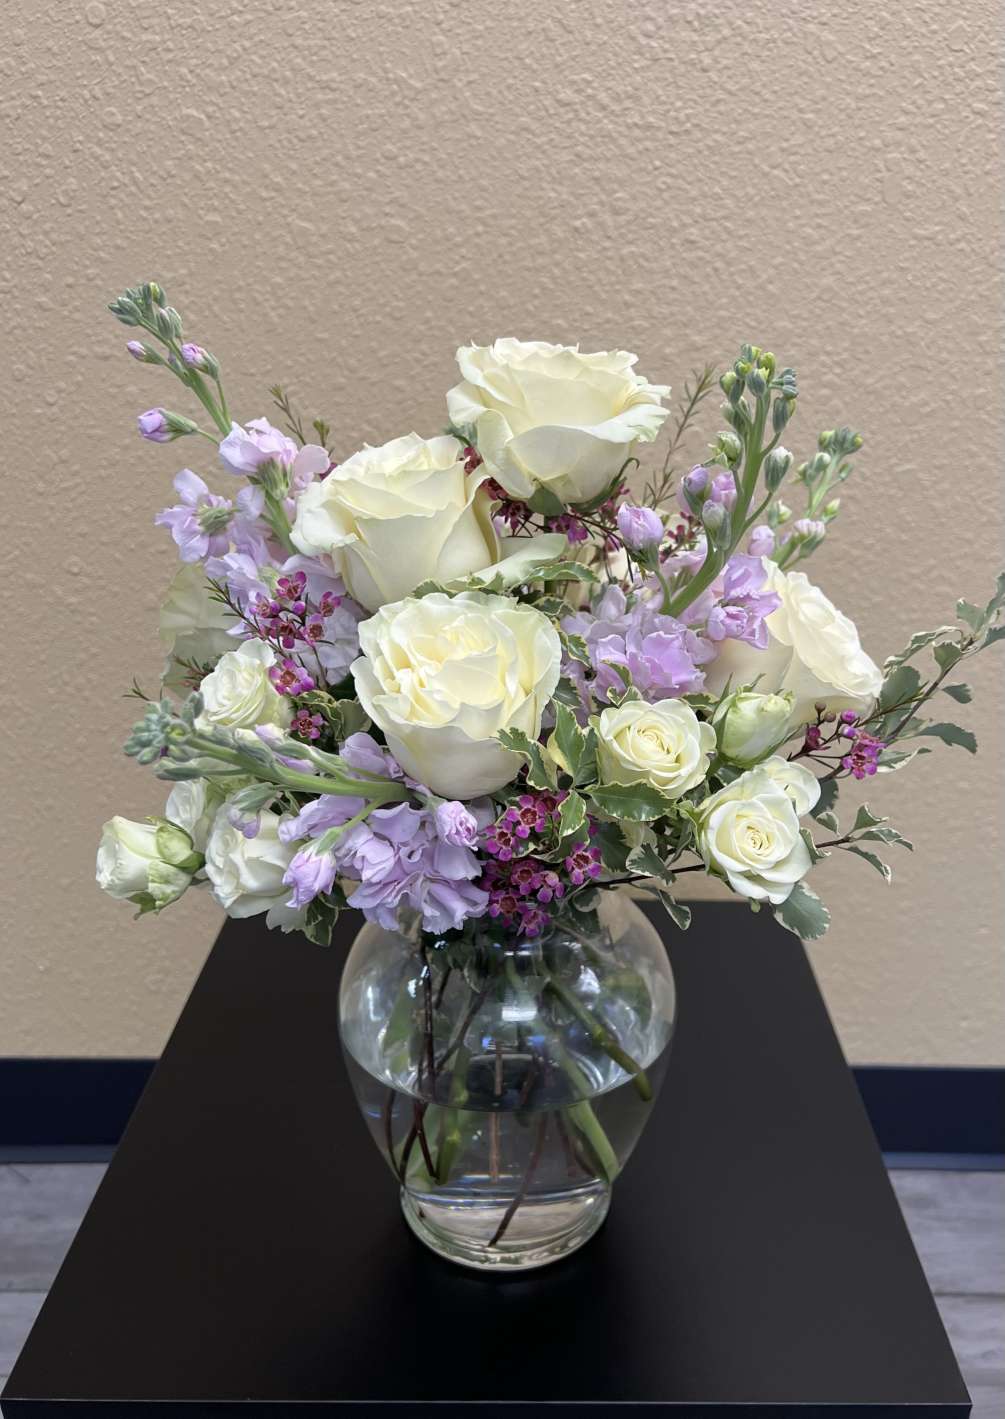 Send this sweet pastel bouquet for any occasion, and your loved one